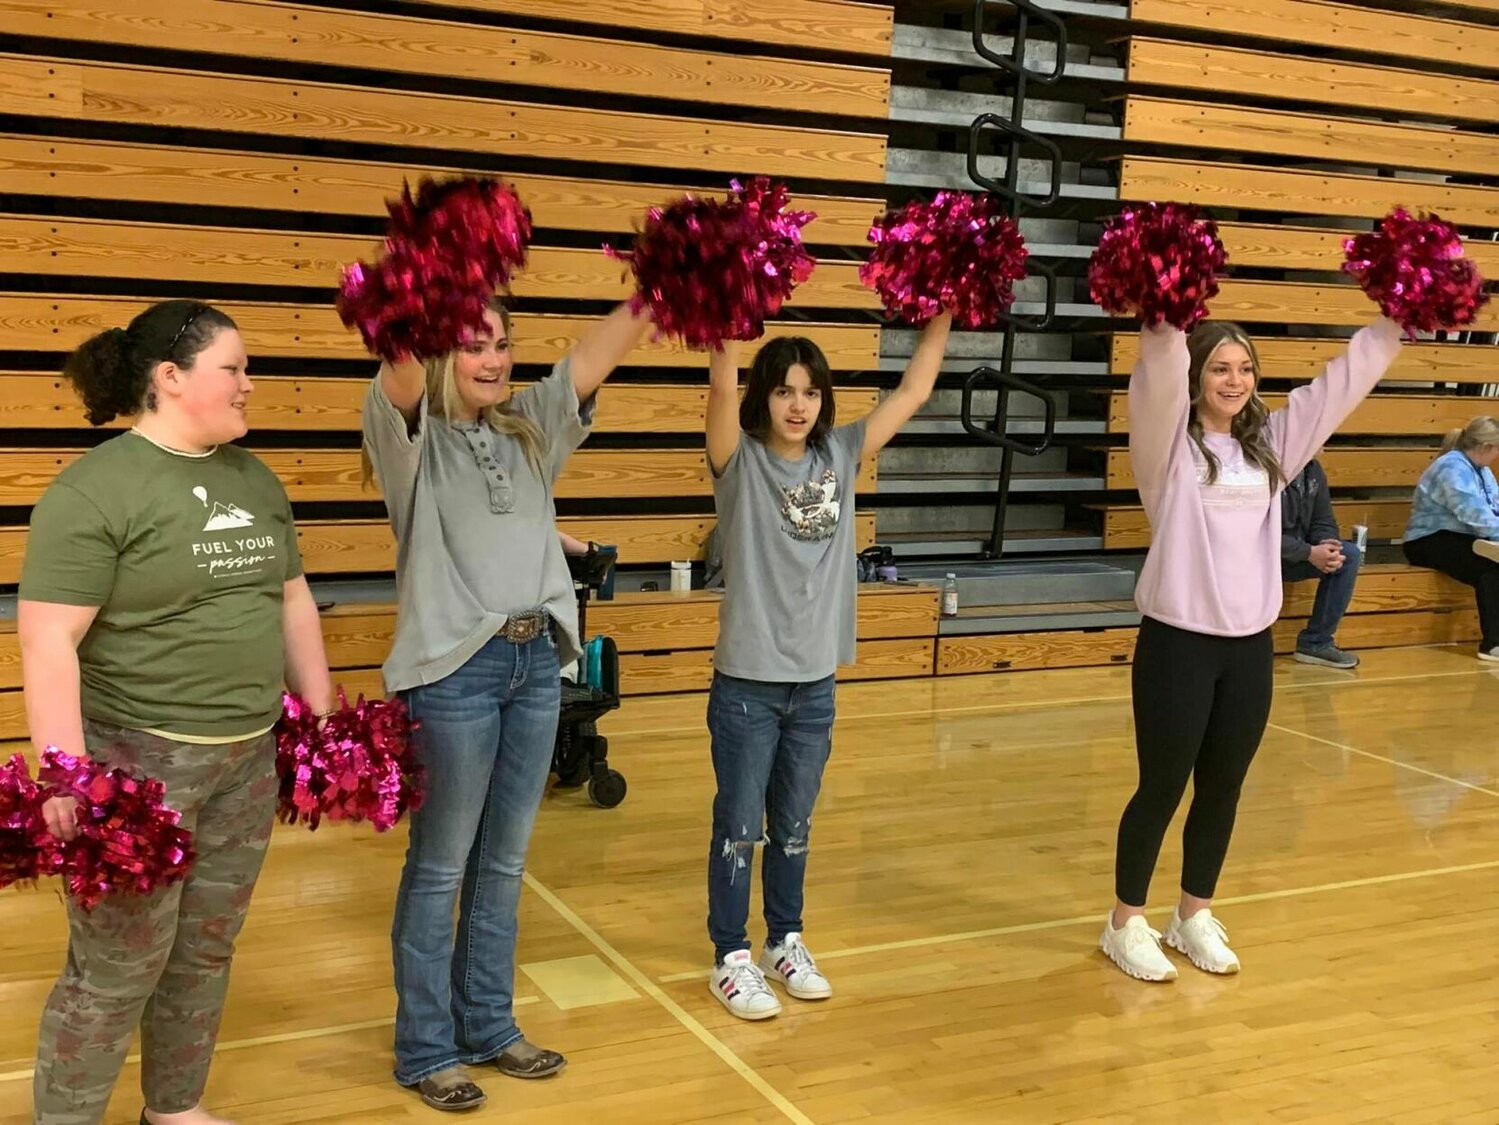 Senior Macie James hosted an “Inclusion Revolution” event on March 9 in the high school gymnasium, benefitting Special Olympics. 